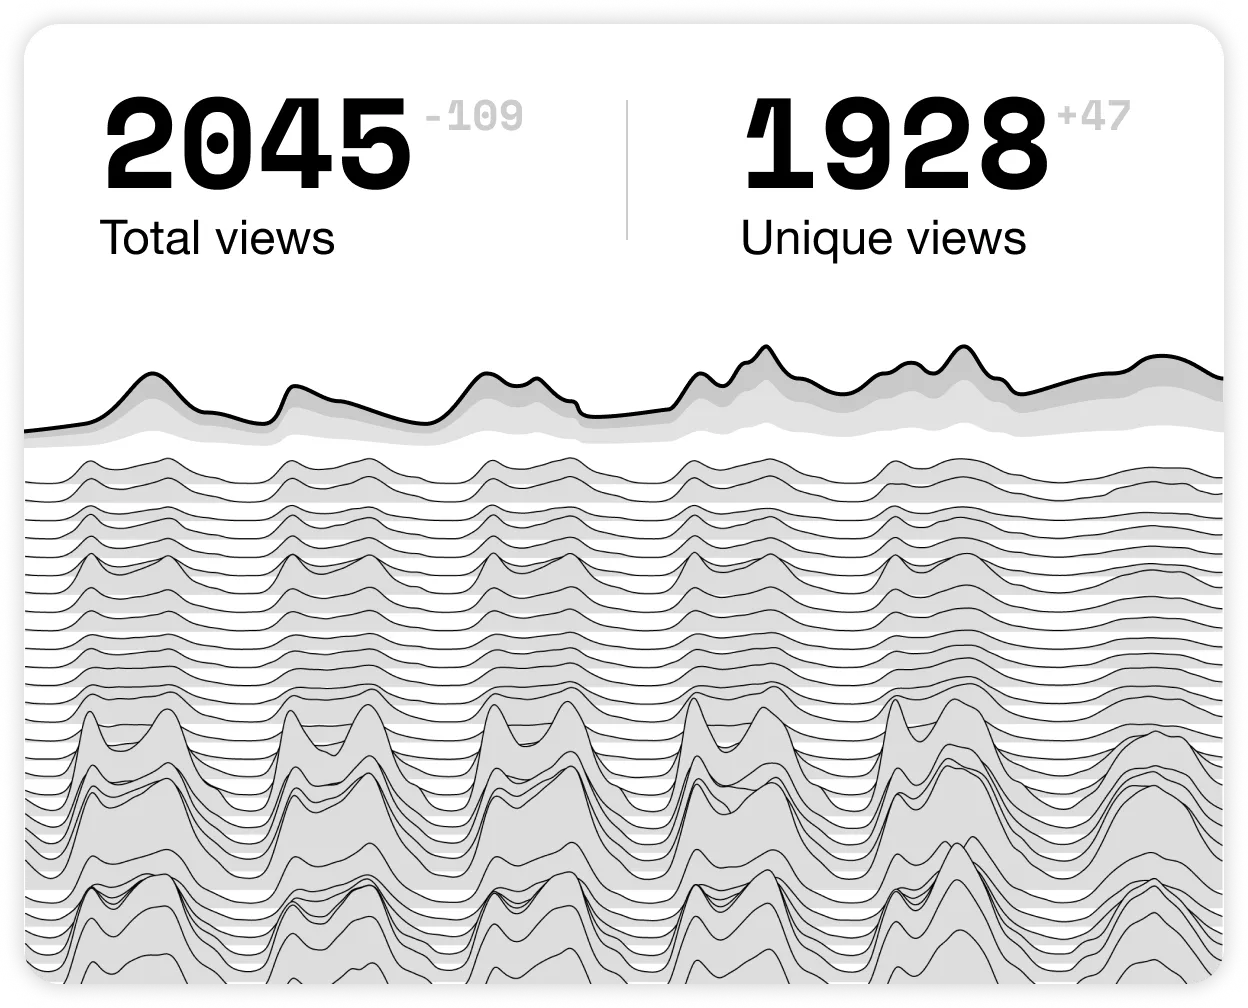 Total and unique views, over time per page and in total.